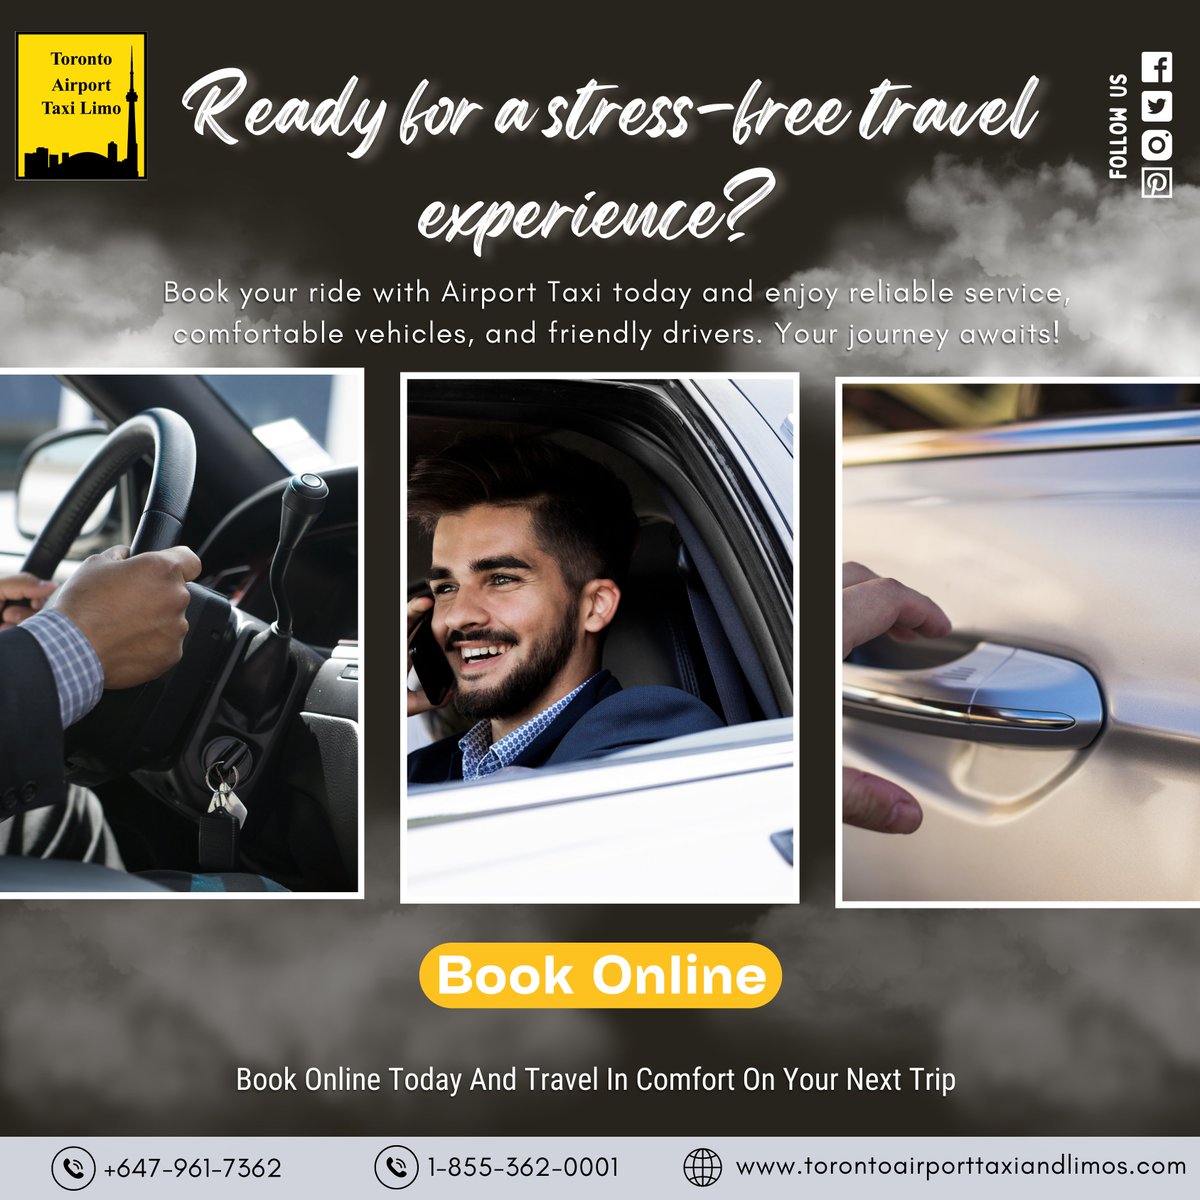 🚕✈️ Ready for a stress-free travel experience? ✈️🚕

🌟 Book your ride with Airport Taxi today and embark on a journey filled with reliability, comfort, and friendly service.

#AirportTaxi #TravelInComfort #TorontoAirport #StressFreeTravel #BookNow #ReliableService #BookYourRide